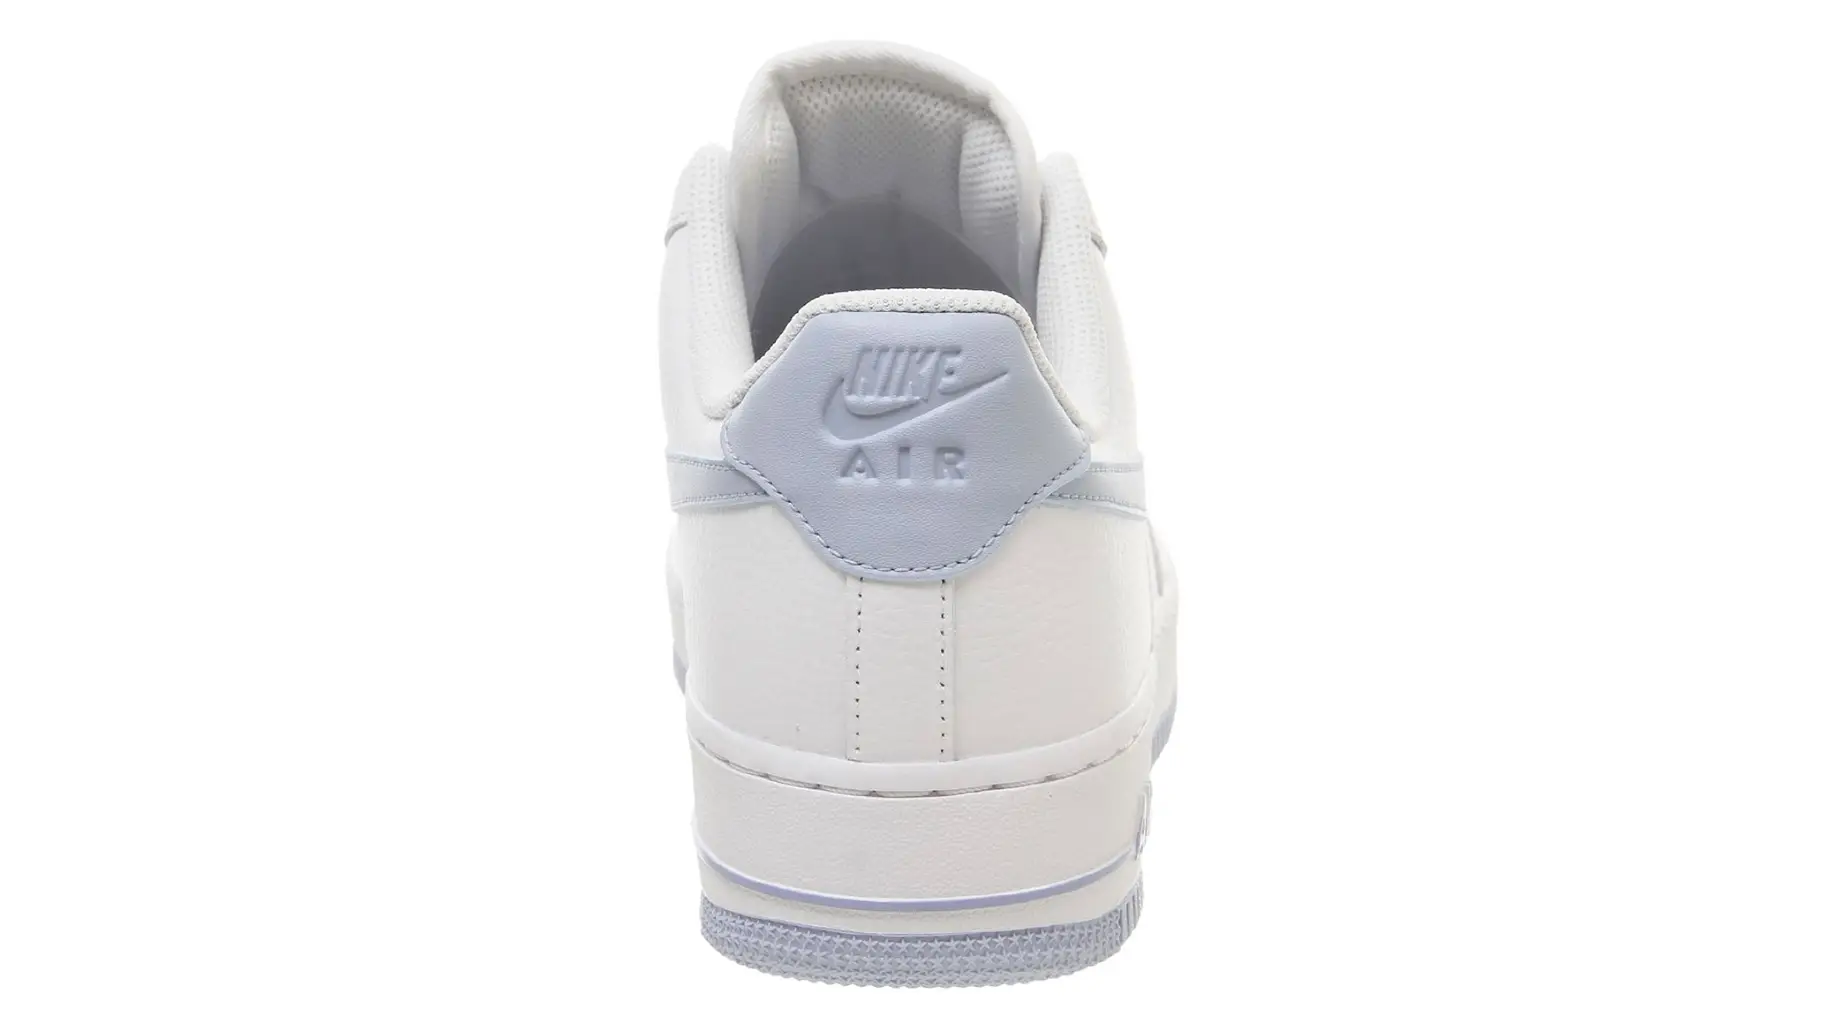 The Nike Air Force 1 Gets A Fresh Blue Update | The Sole Supplier